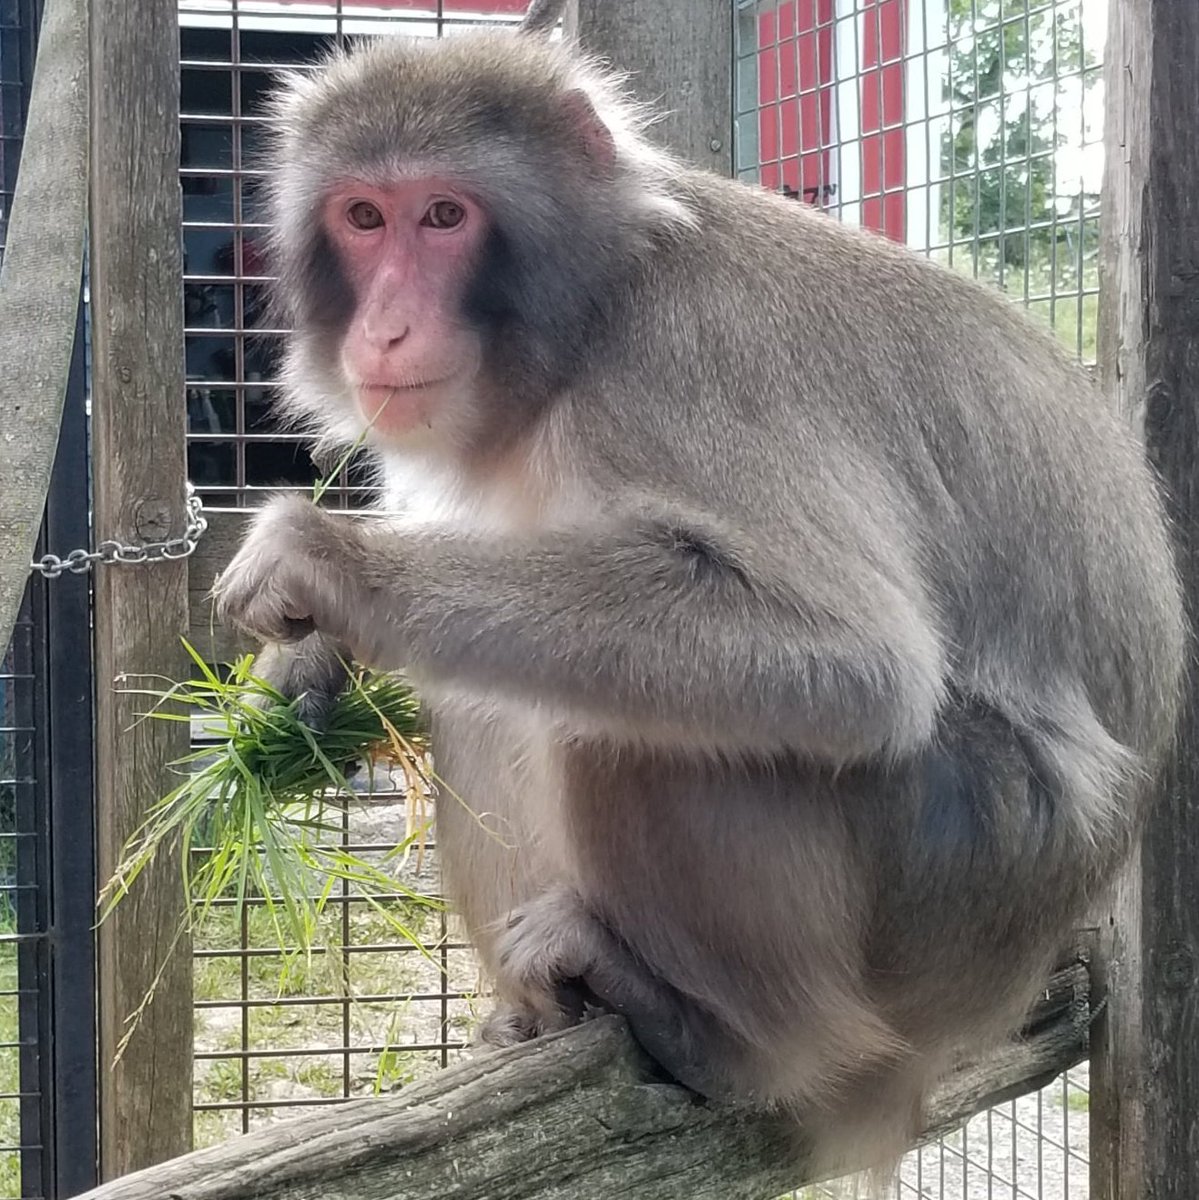 Darwin has been living at @SBFPrimateS after escaping from his owners, where he now leads an enriched and stress free life where he's been able to forge social bonds with other primates of his species ❤️ Consider donating  towards his care!: storybookmonkeys.org